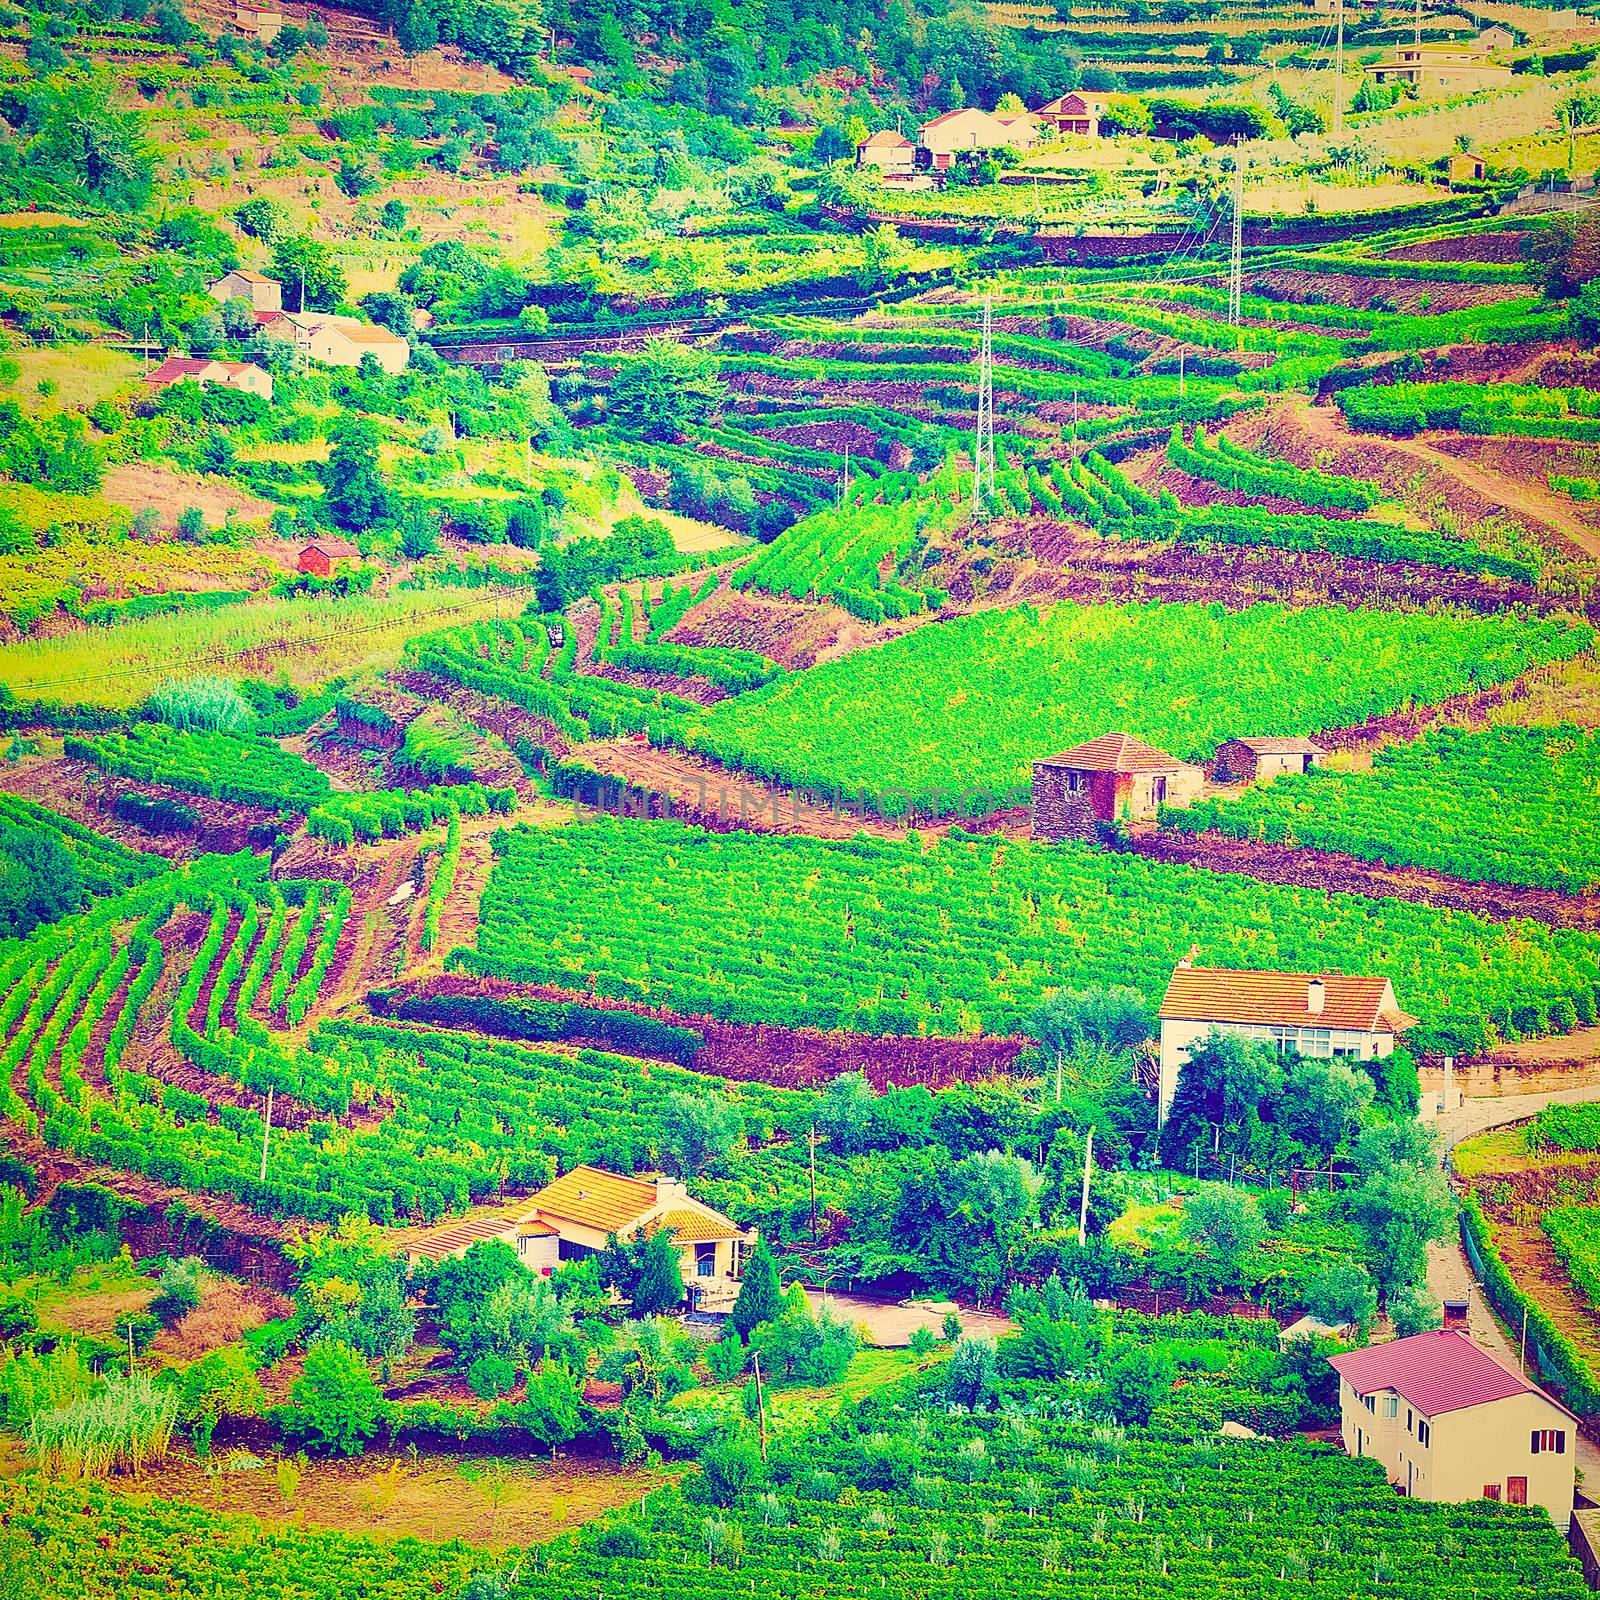 Extensive Vineyards on the Hills of Portugal, Instagram Effect